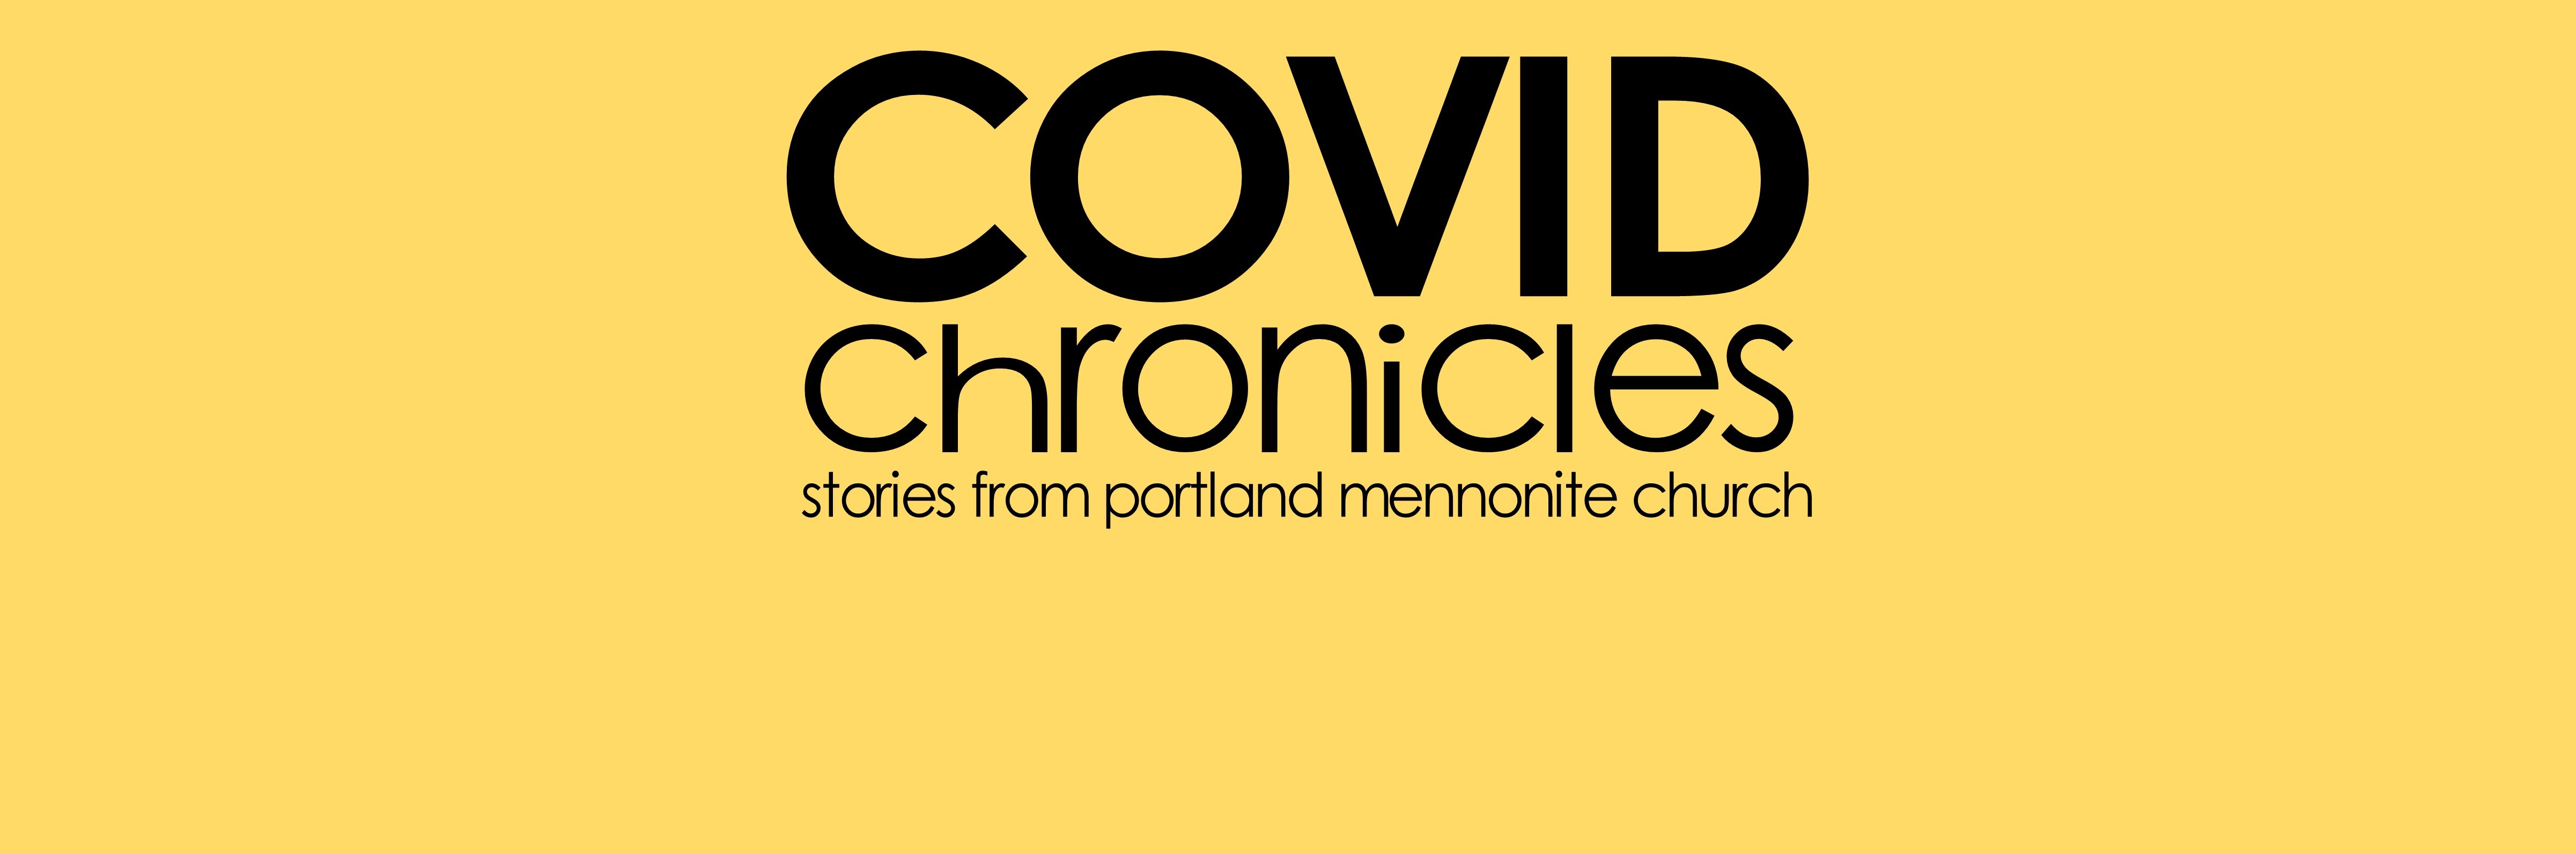 THE COVID CHRONICLES